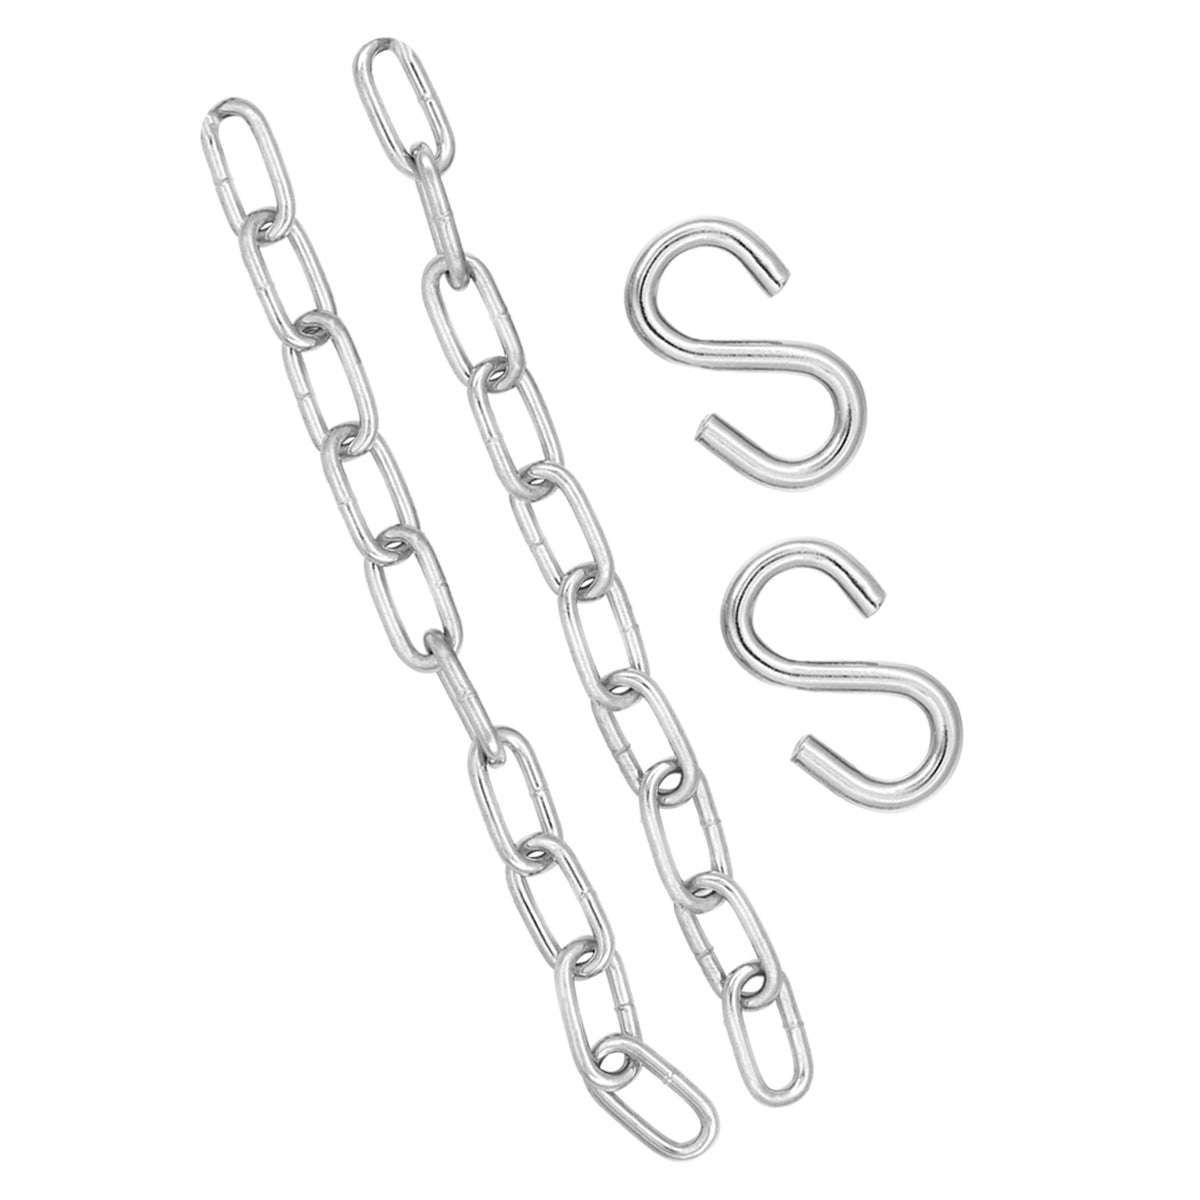 Two 12-inch metal chains and two S hooks.